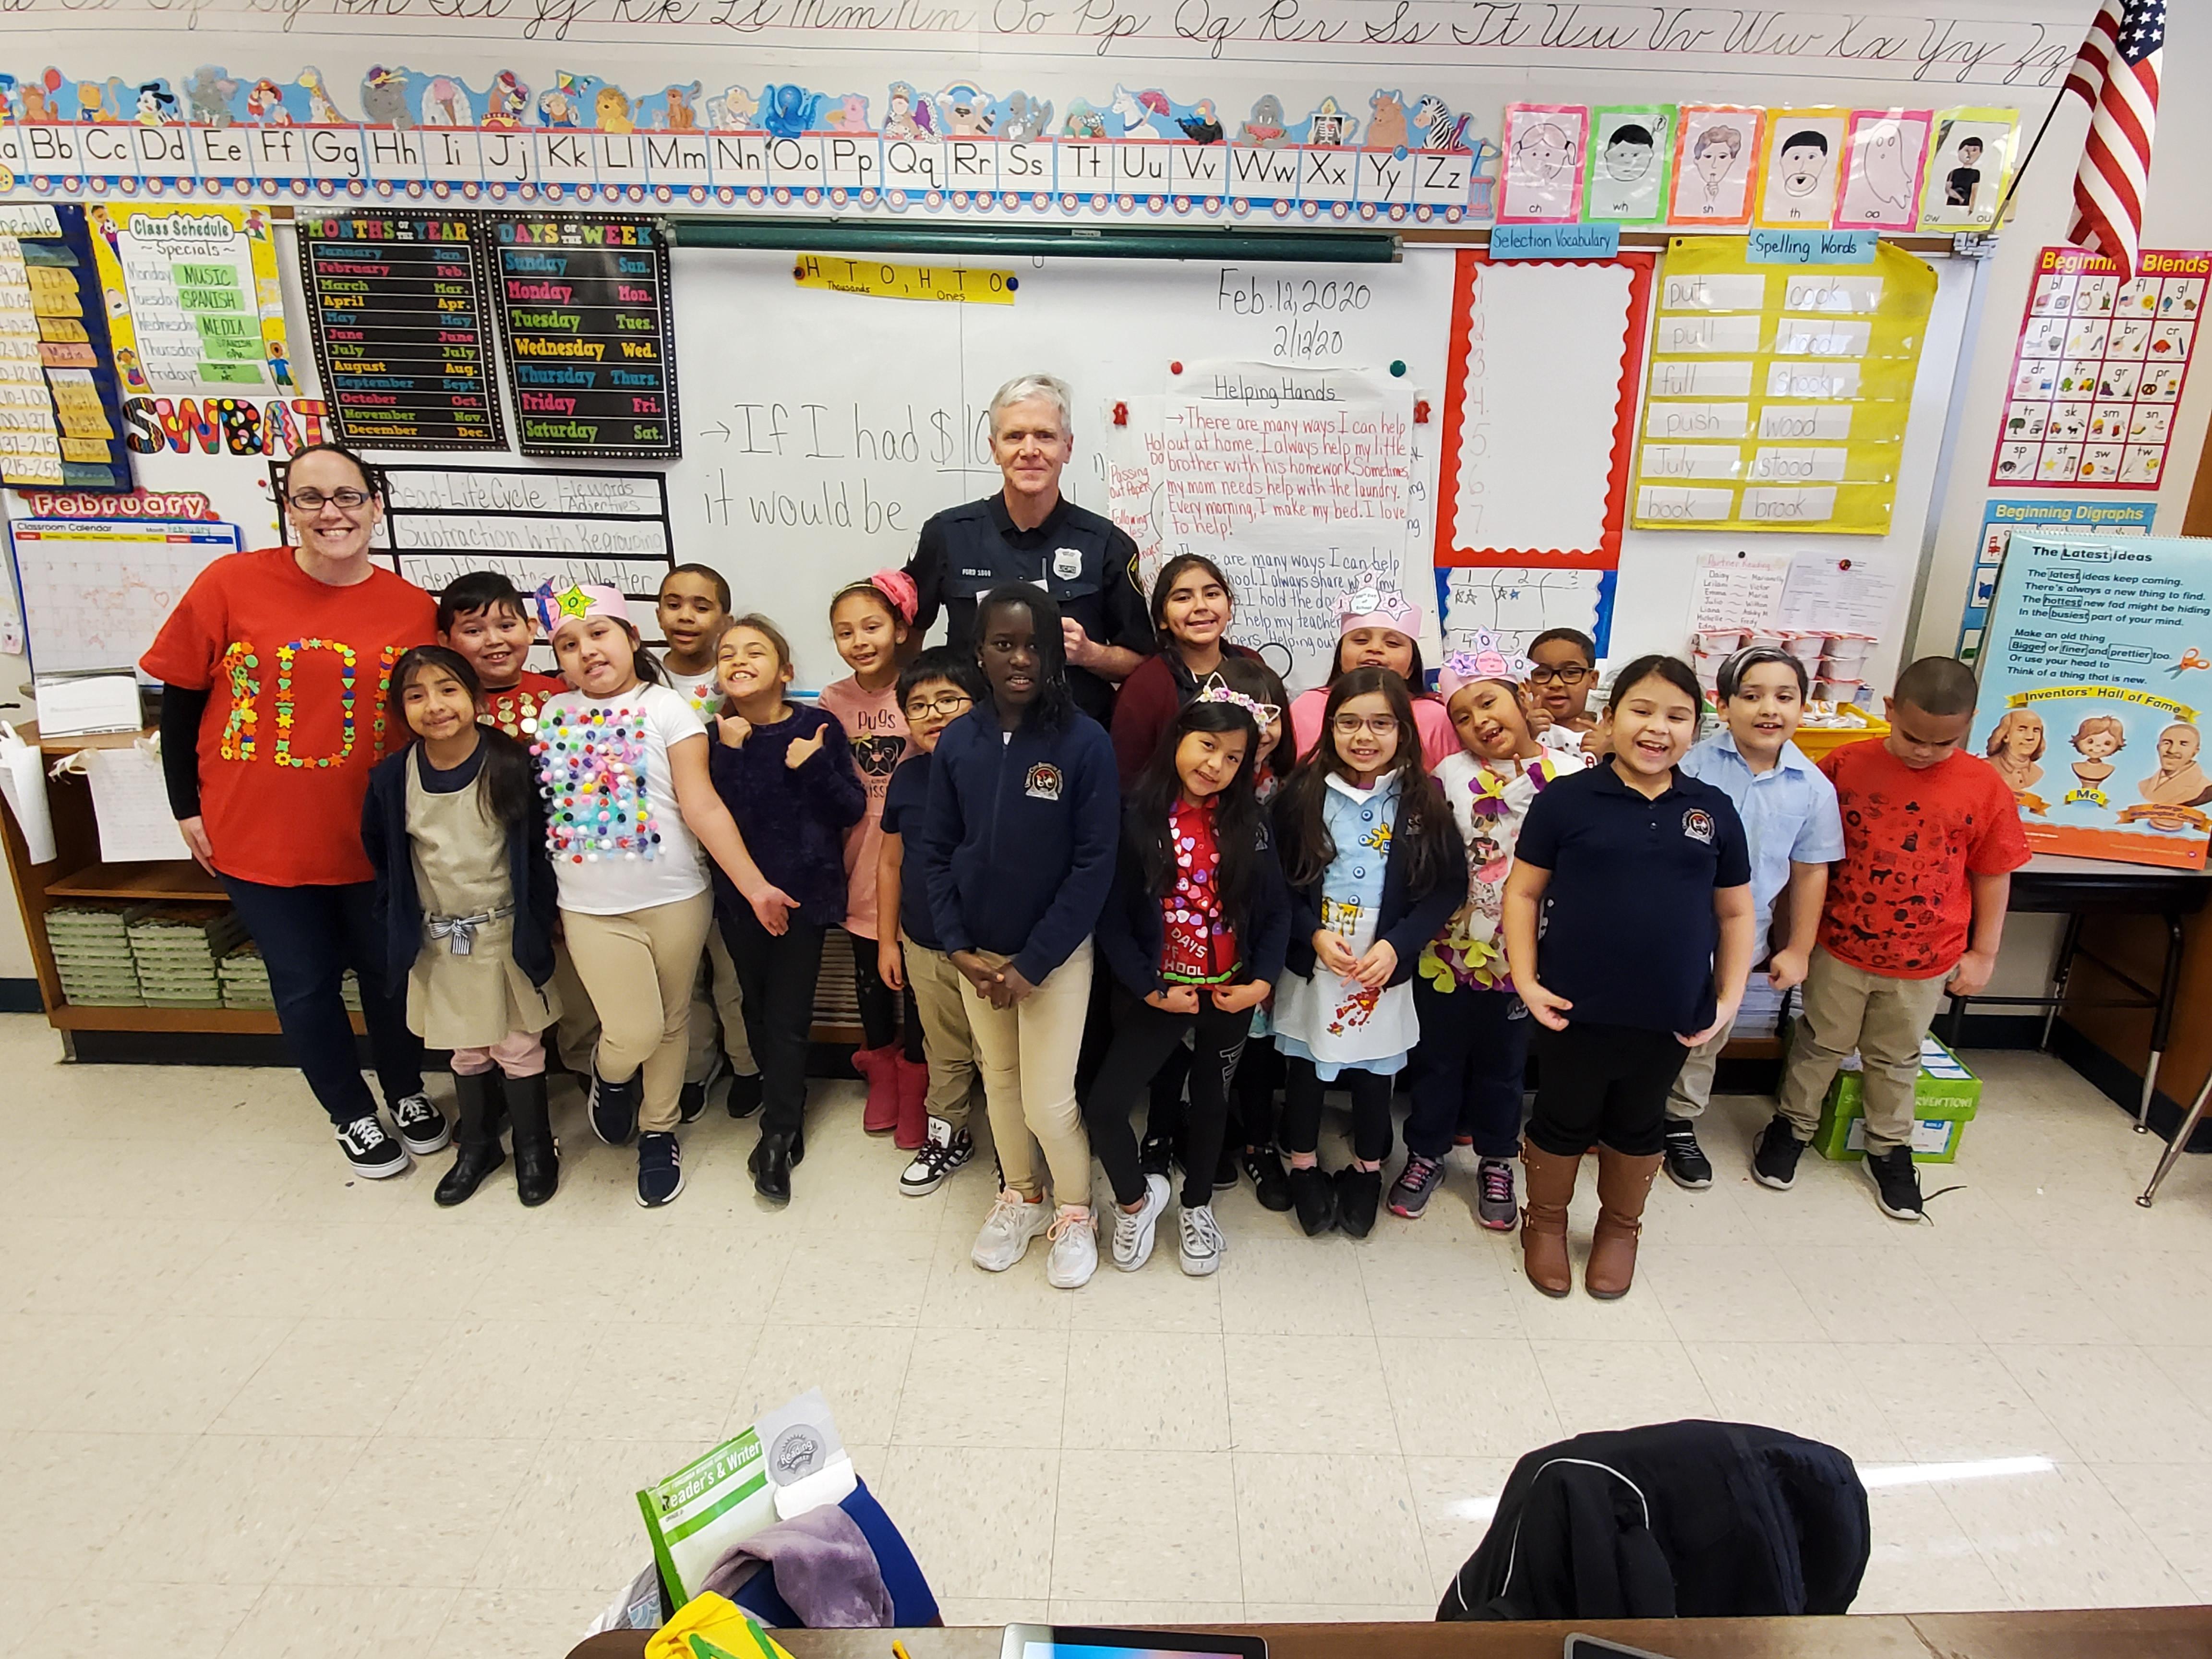 Room 605 students with teacher and Officer Ford